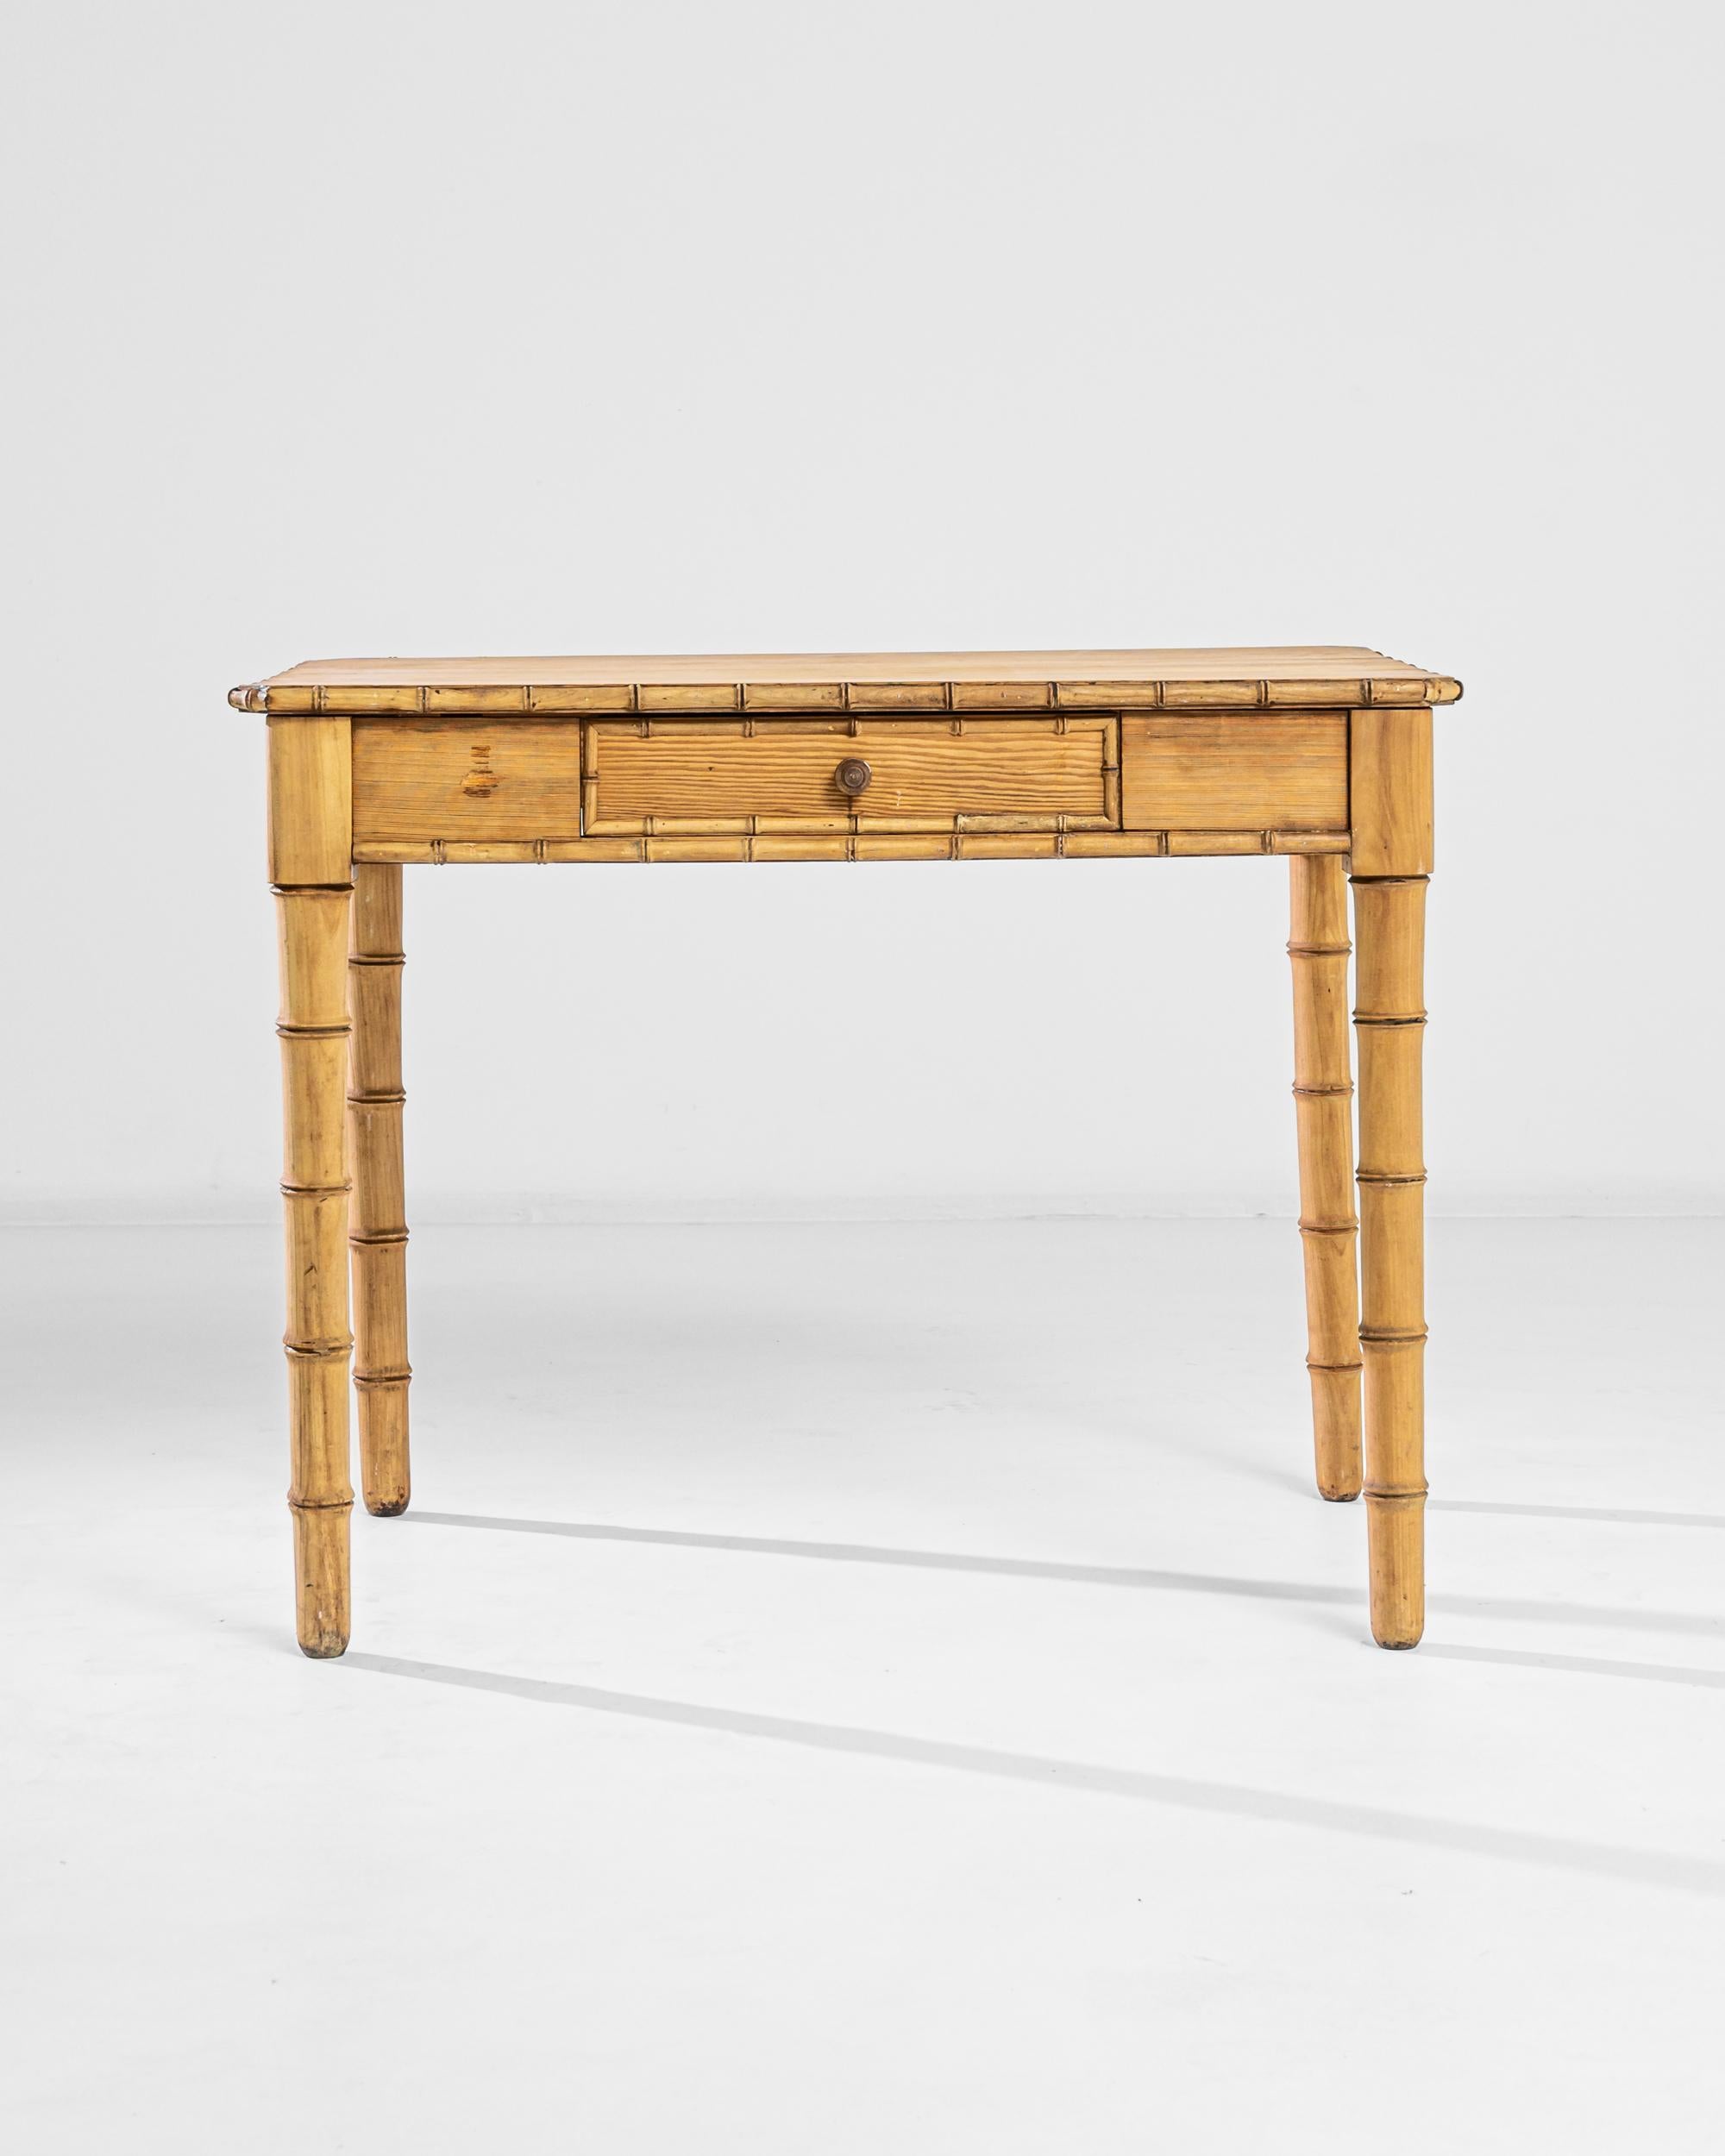 This wooden occasional table was produced in France, circa 1900. A low bamboo and golden wheat wood table with a perfect tone match, this occasional table features a practical front drawer adorned with a darker wooden pull and a subtle patina. The